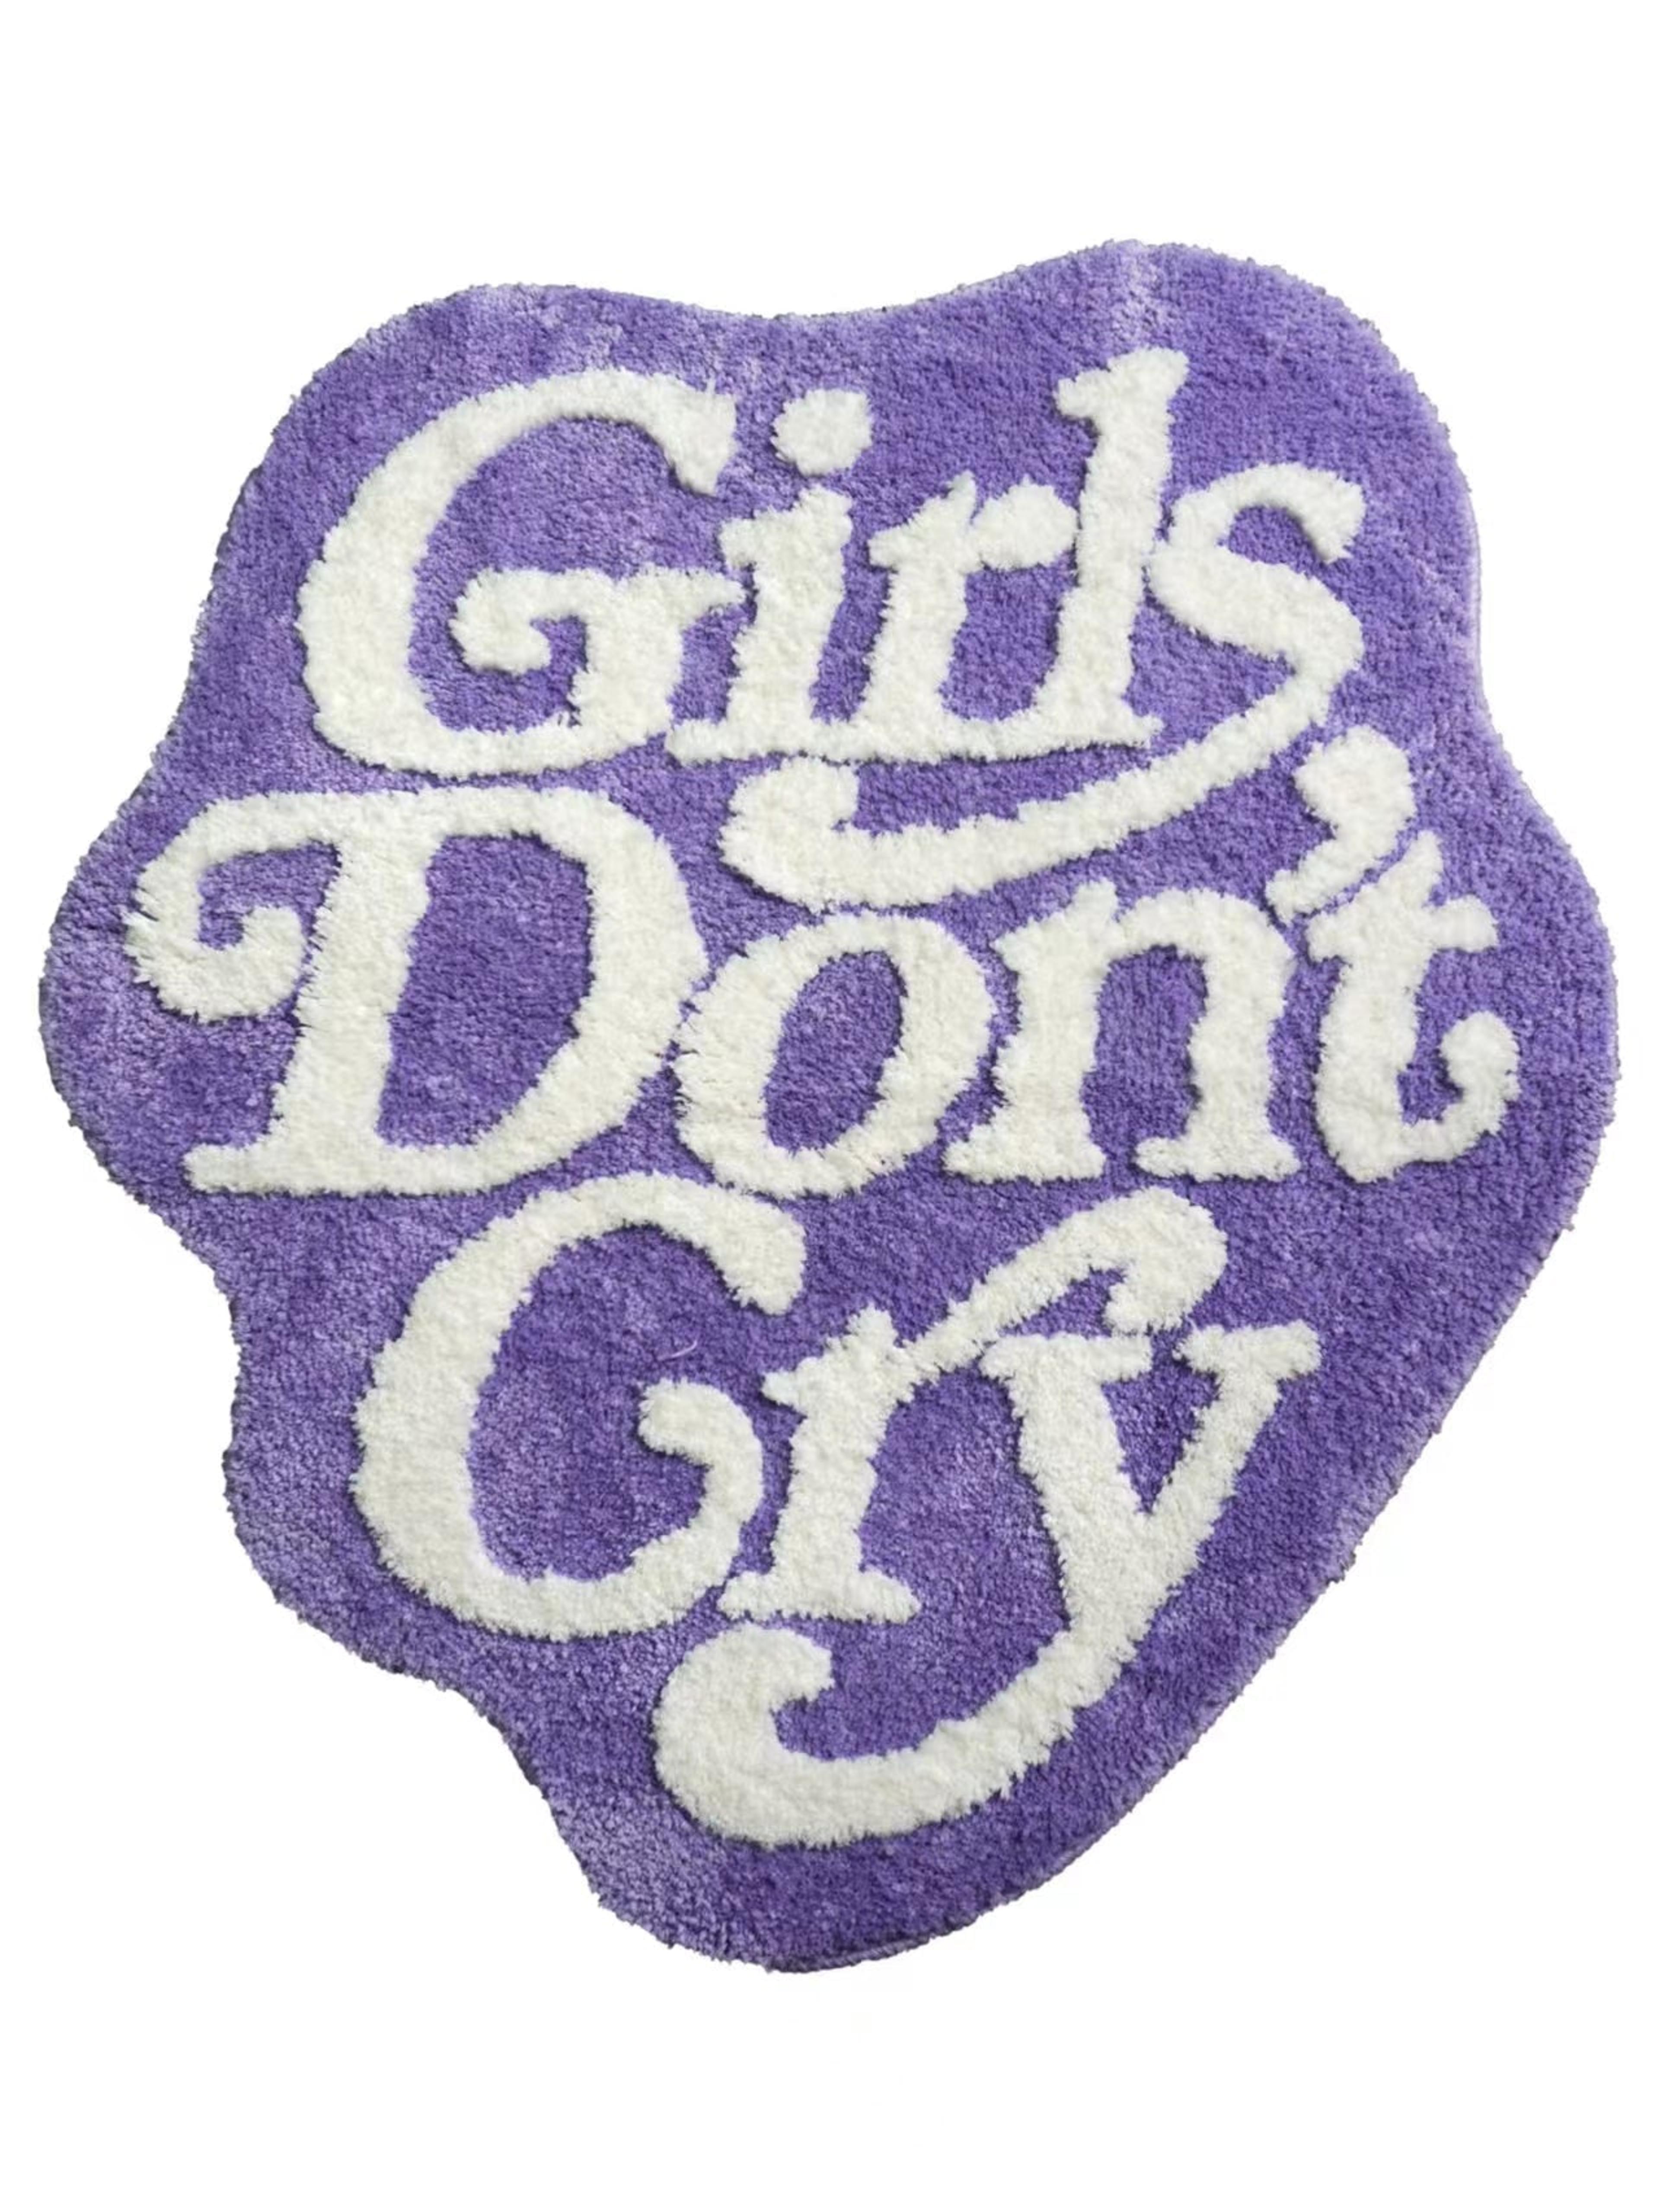 Alternate View 1 of Girls Don’t Cry Rug Purple